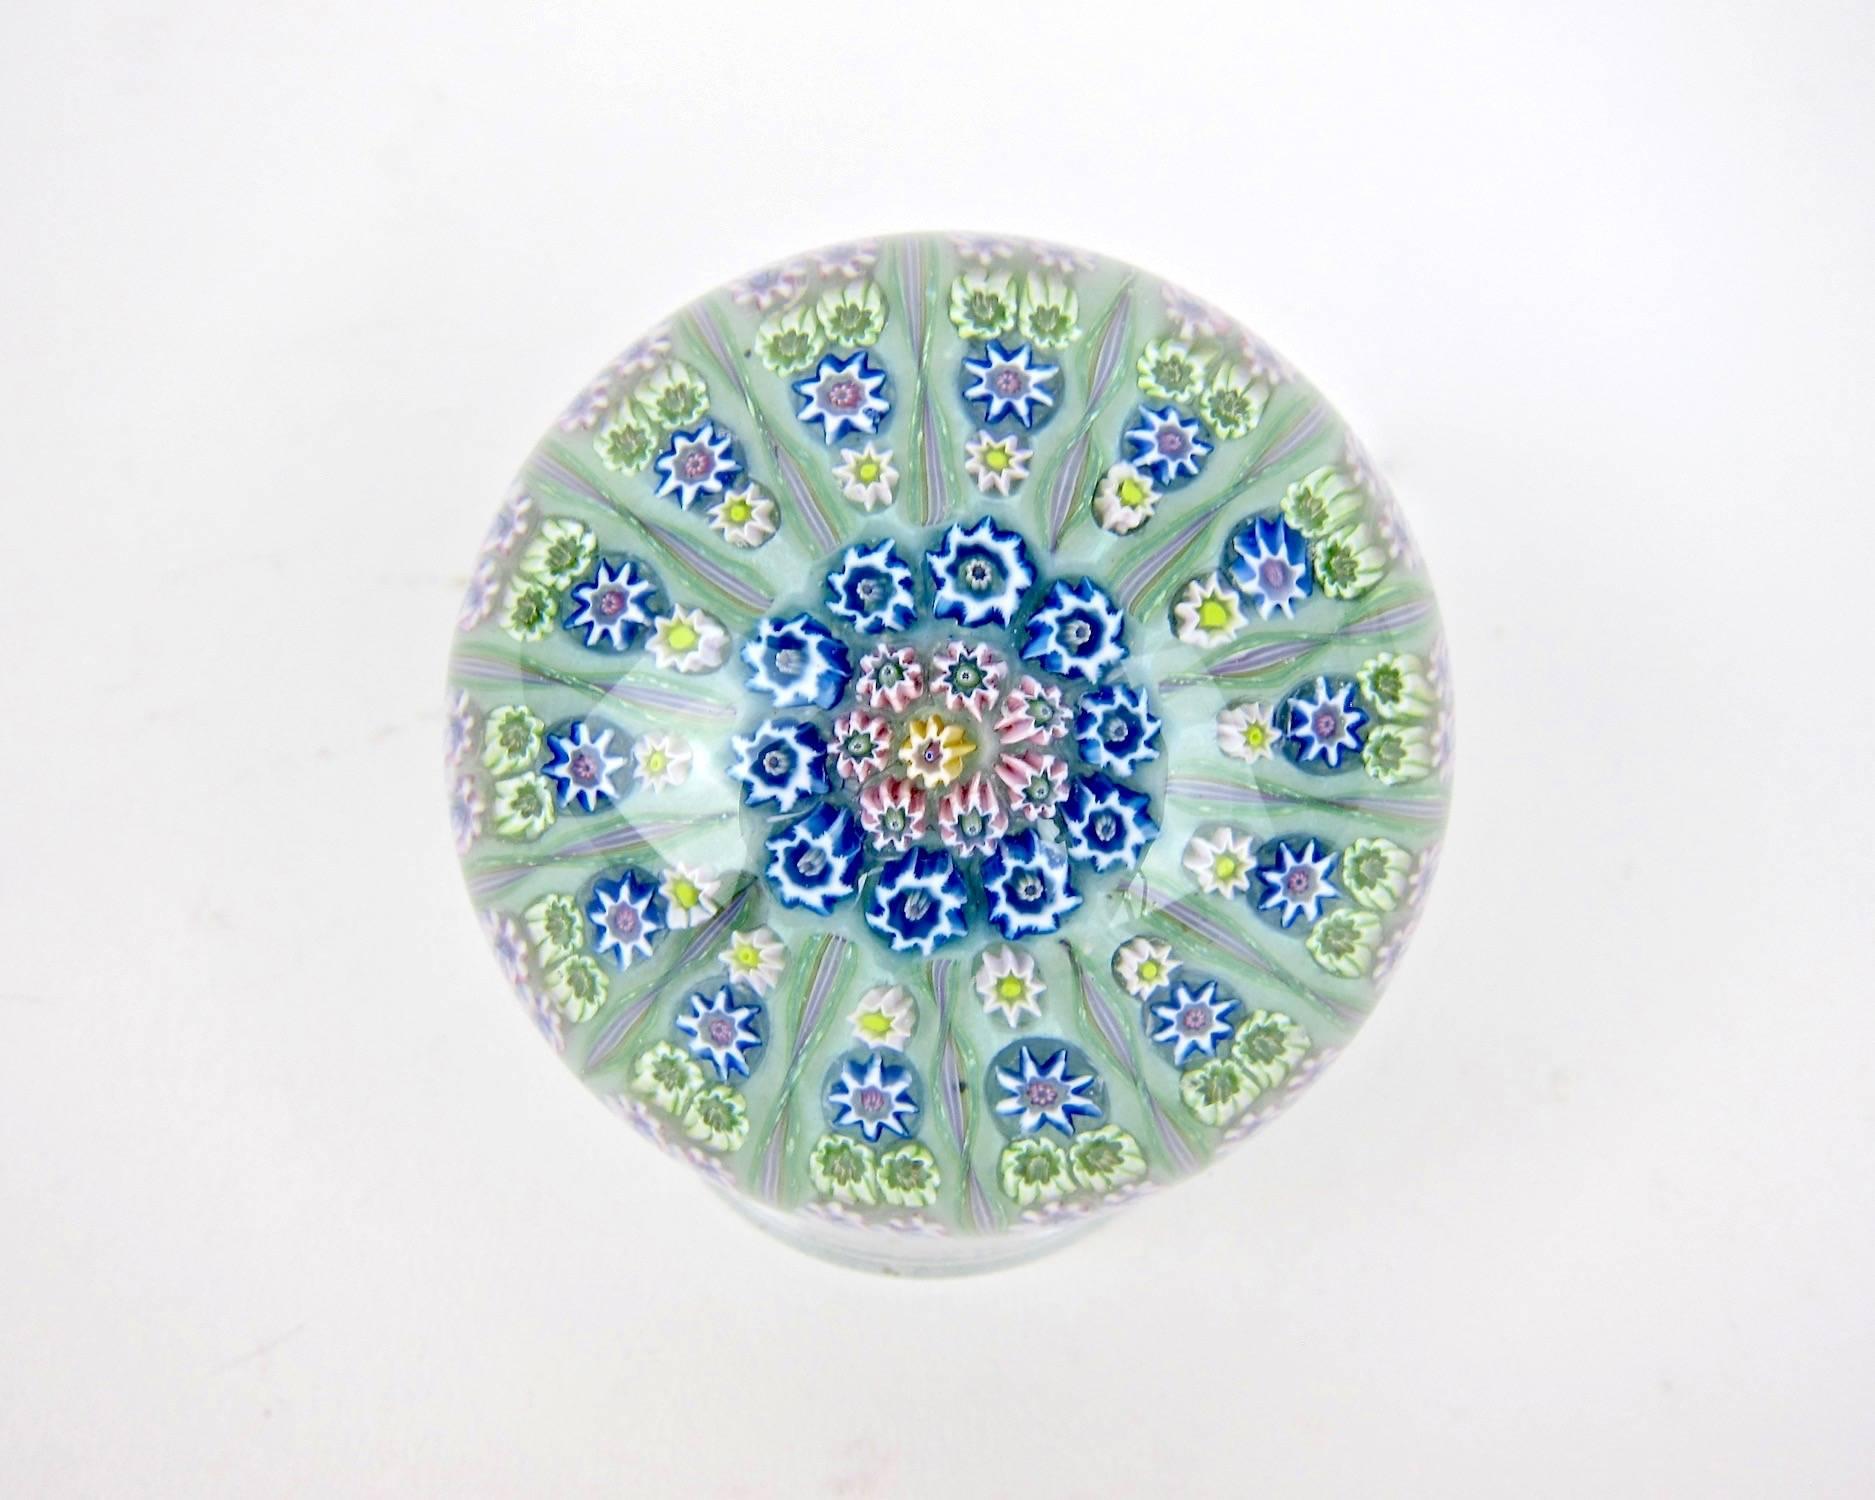 A vintage millefiori and twist art glass paperweight, handcrafted in Crieff, Scotland at Perthshire Paperweights, Ltd., circa 1969-1970.

Designed in a 1-1-2-2 pattern of fine millefiori canes separated by 14 spokes radiating from two rows of